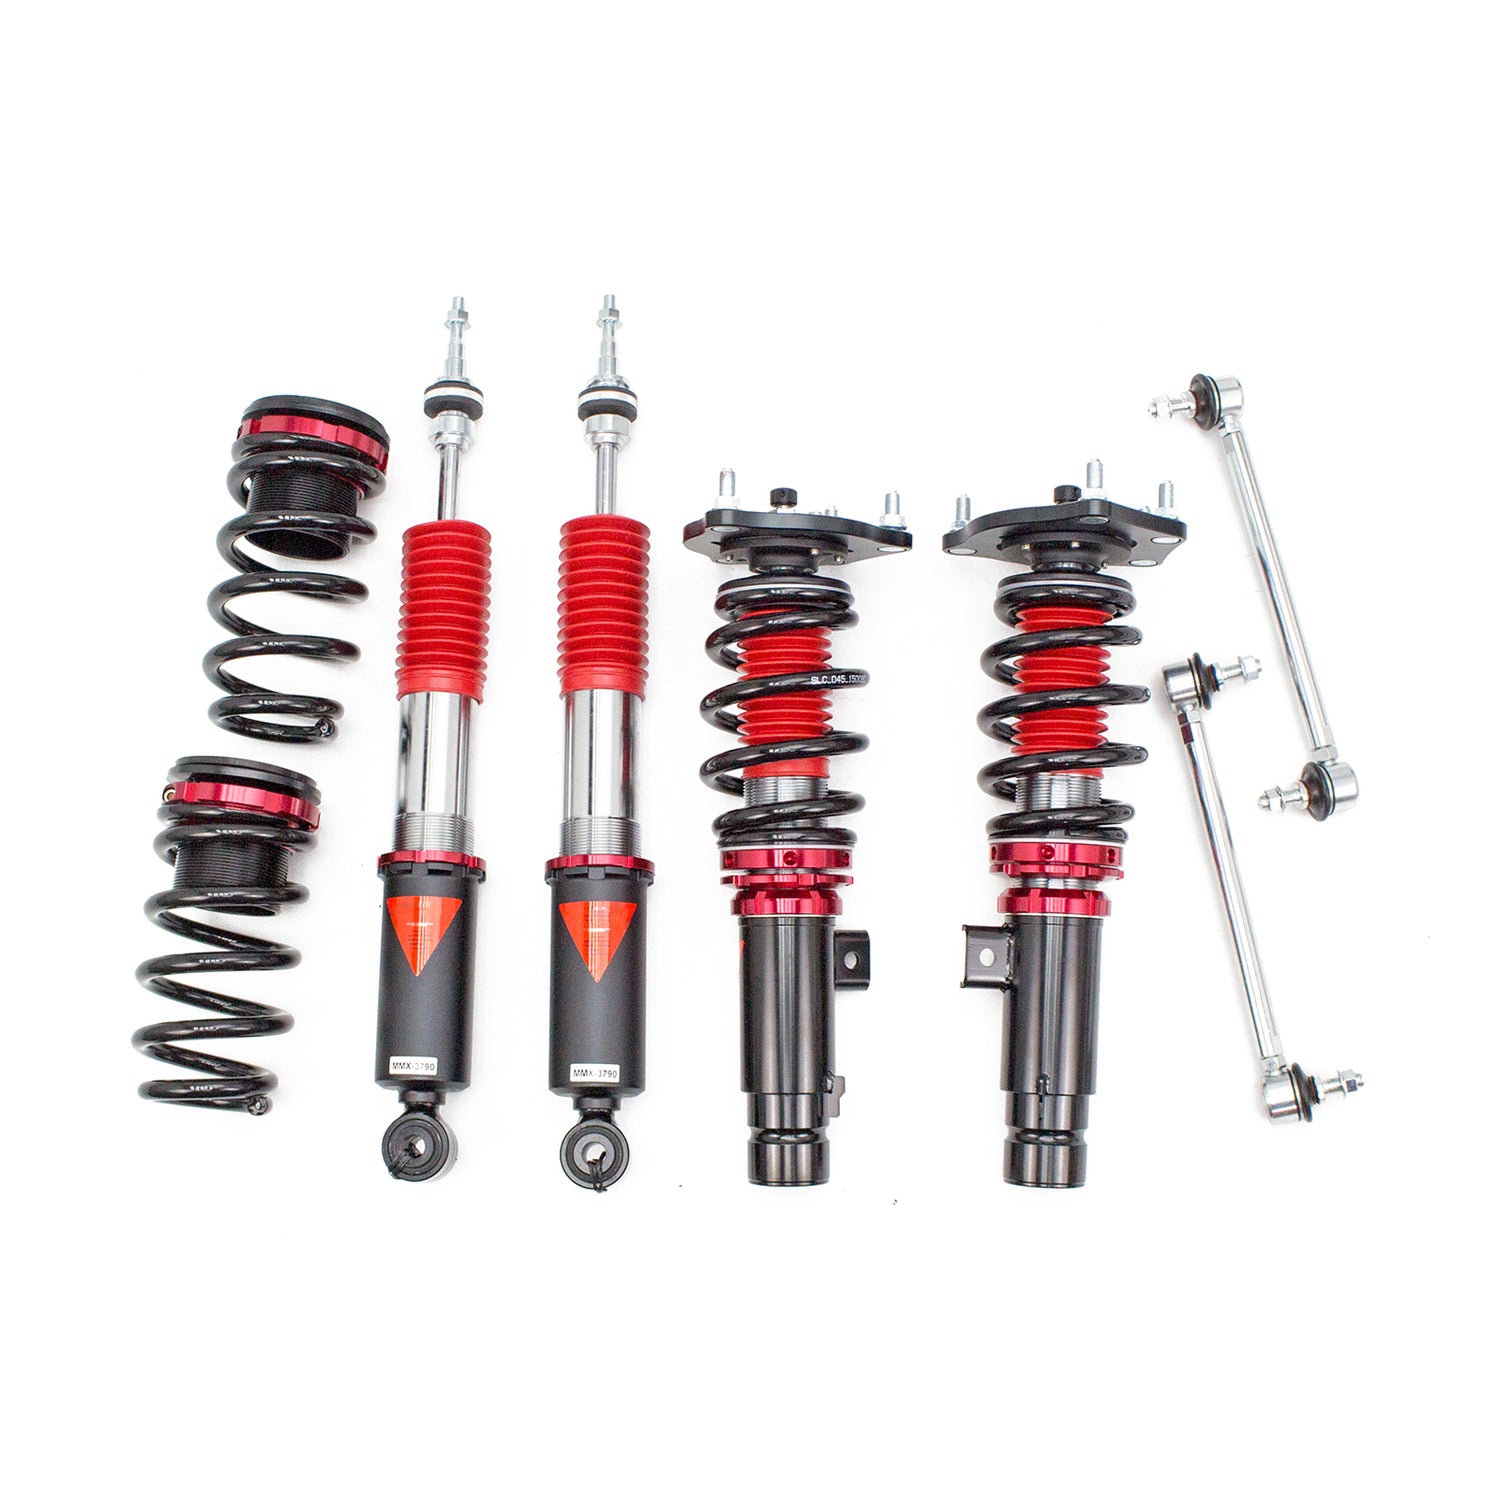 MMX3790 MAXX Coilovers Lowering Kit, Fully Adjustable, Ride Height, 40 Clicks Rebound Settings, Honda Civic(FC) 2016+Up